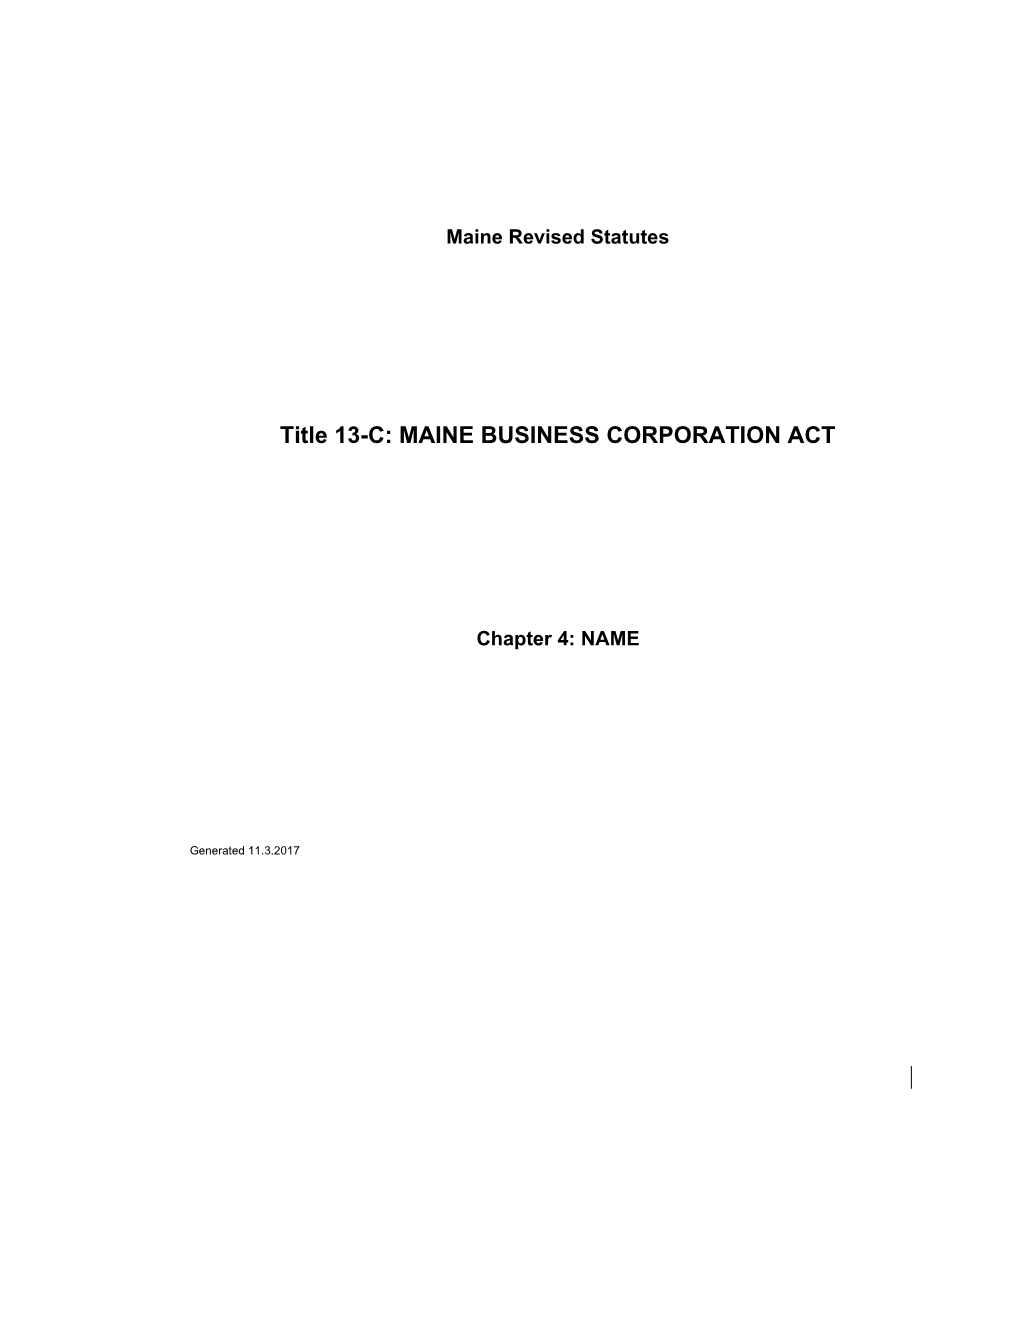 MRS Title 13-C 403. REGISTERED NAME of FOREIGN CORPORATION